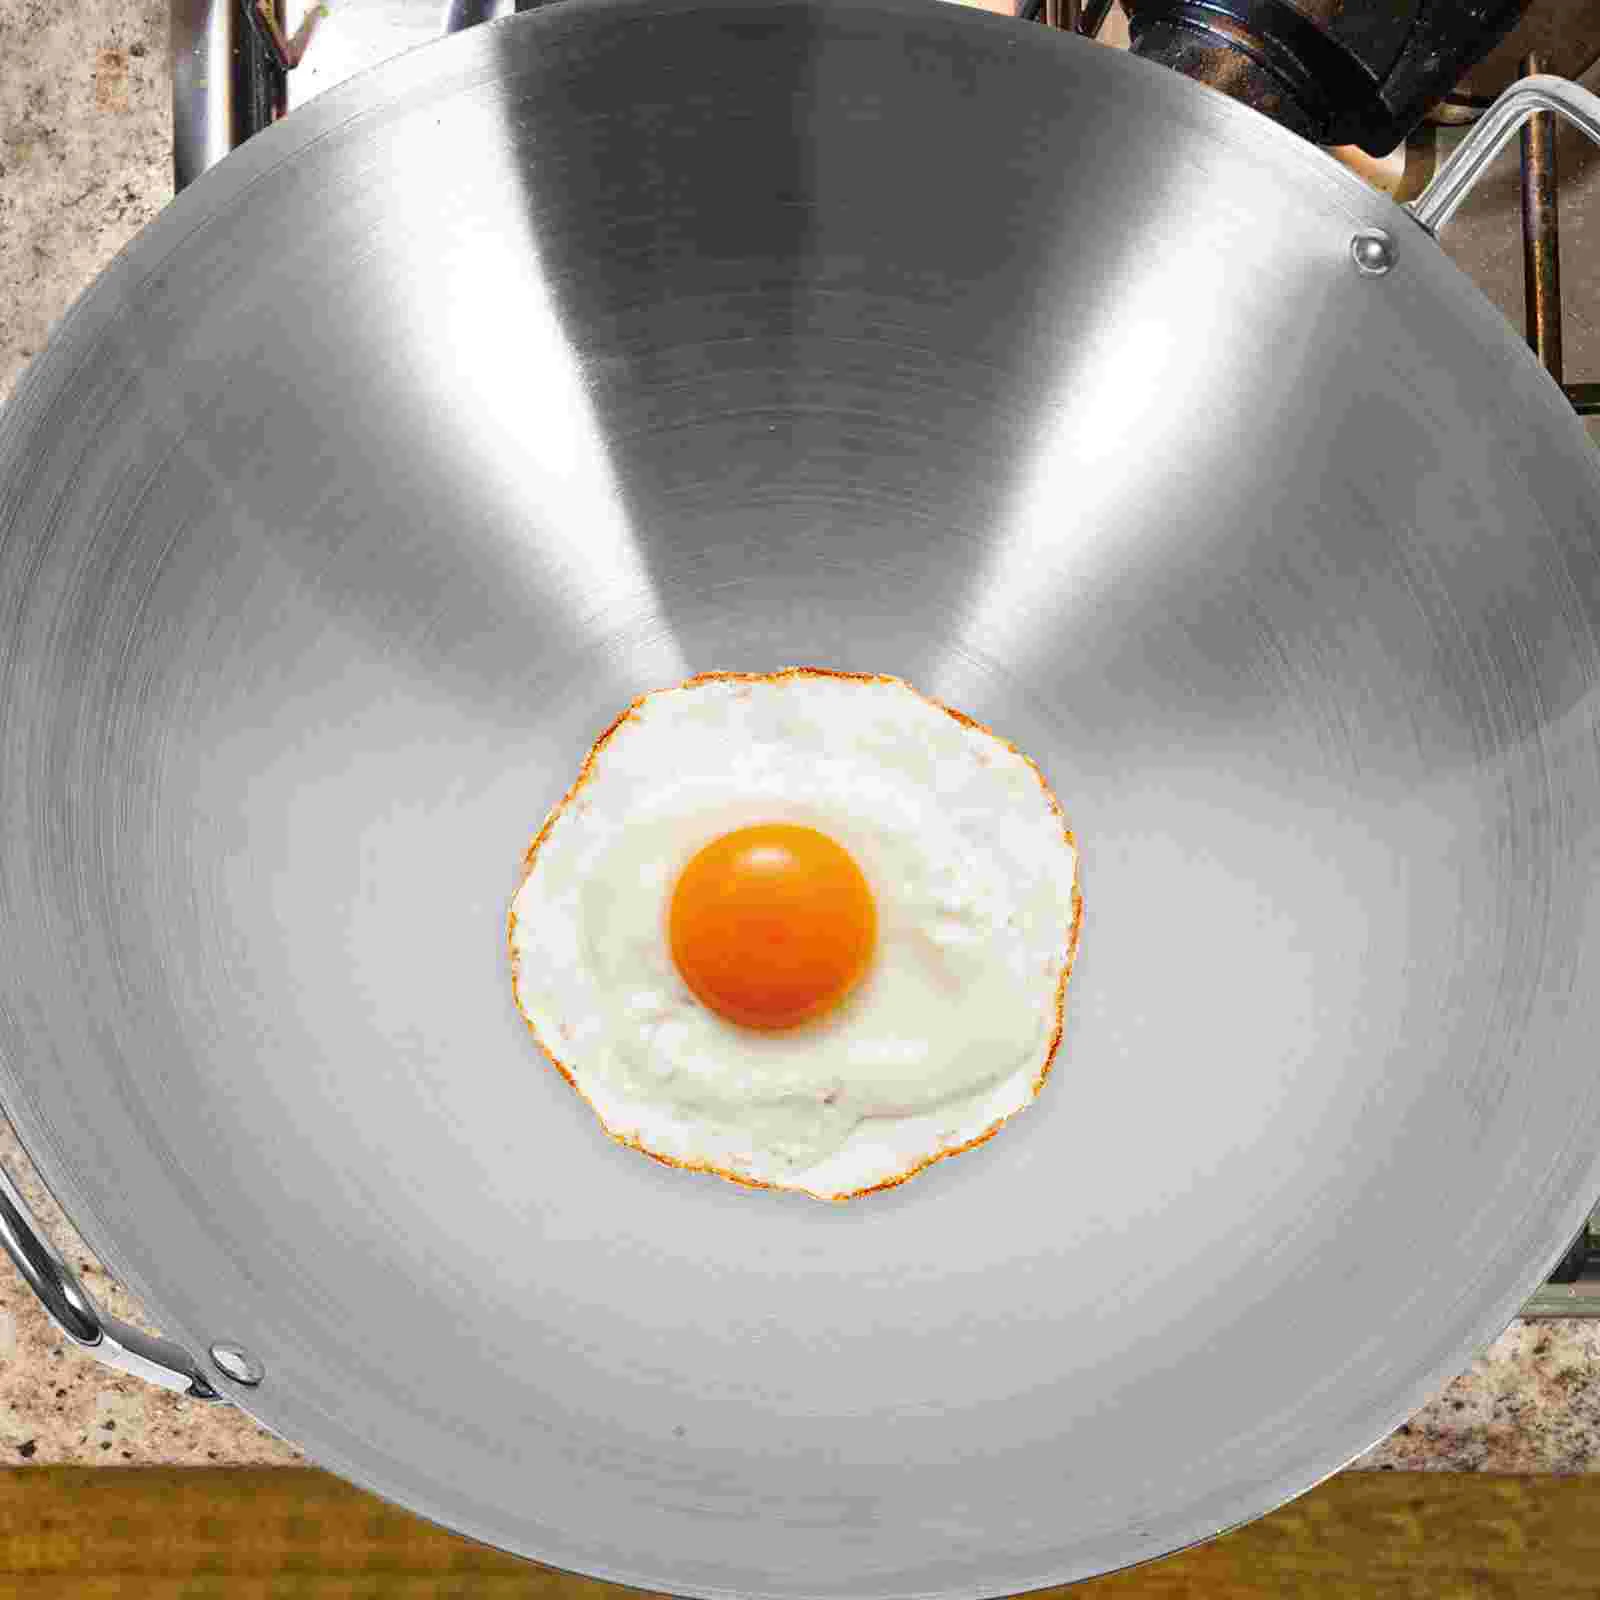 Steel Induction Frying Pan, 12 inch, Brushed Stainless Steel - AliExpress